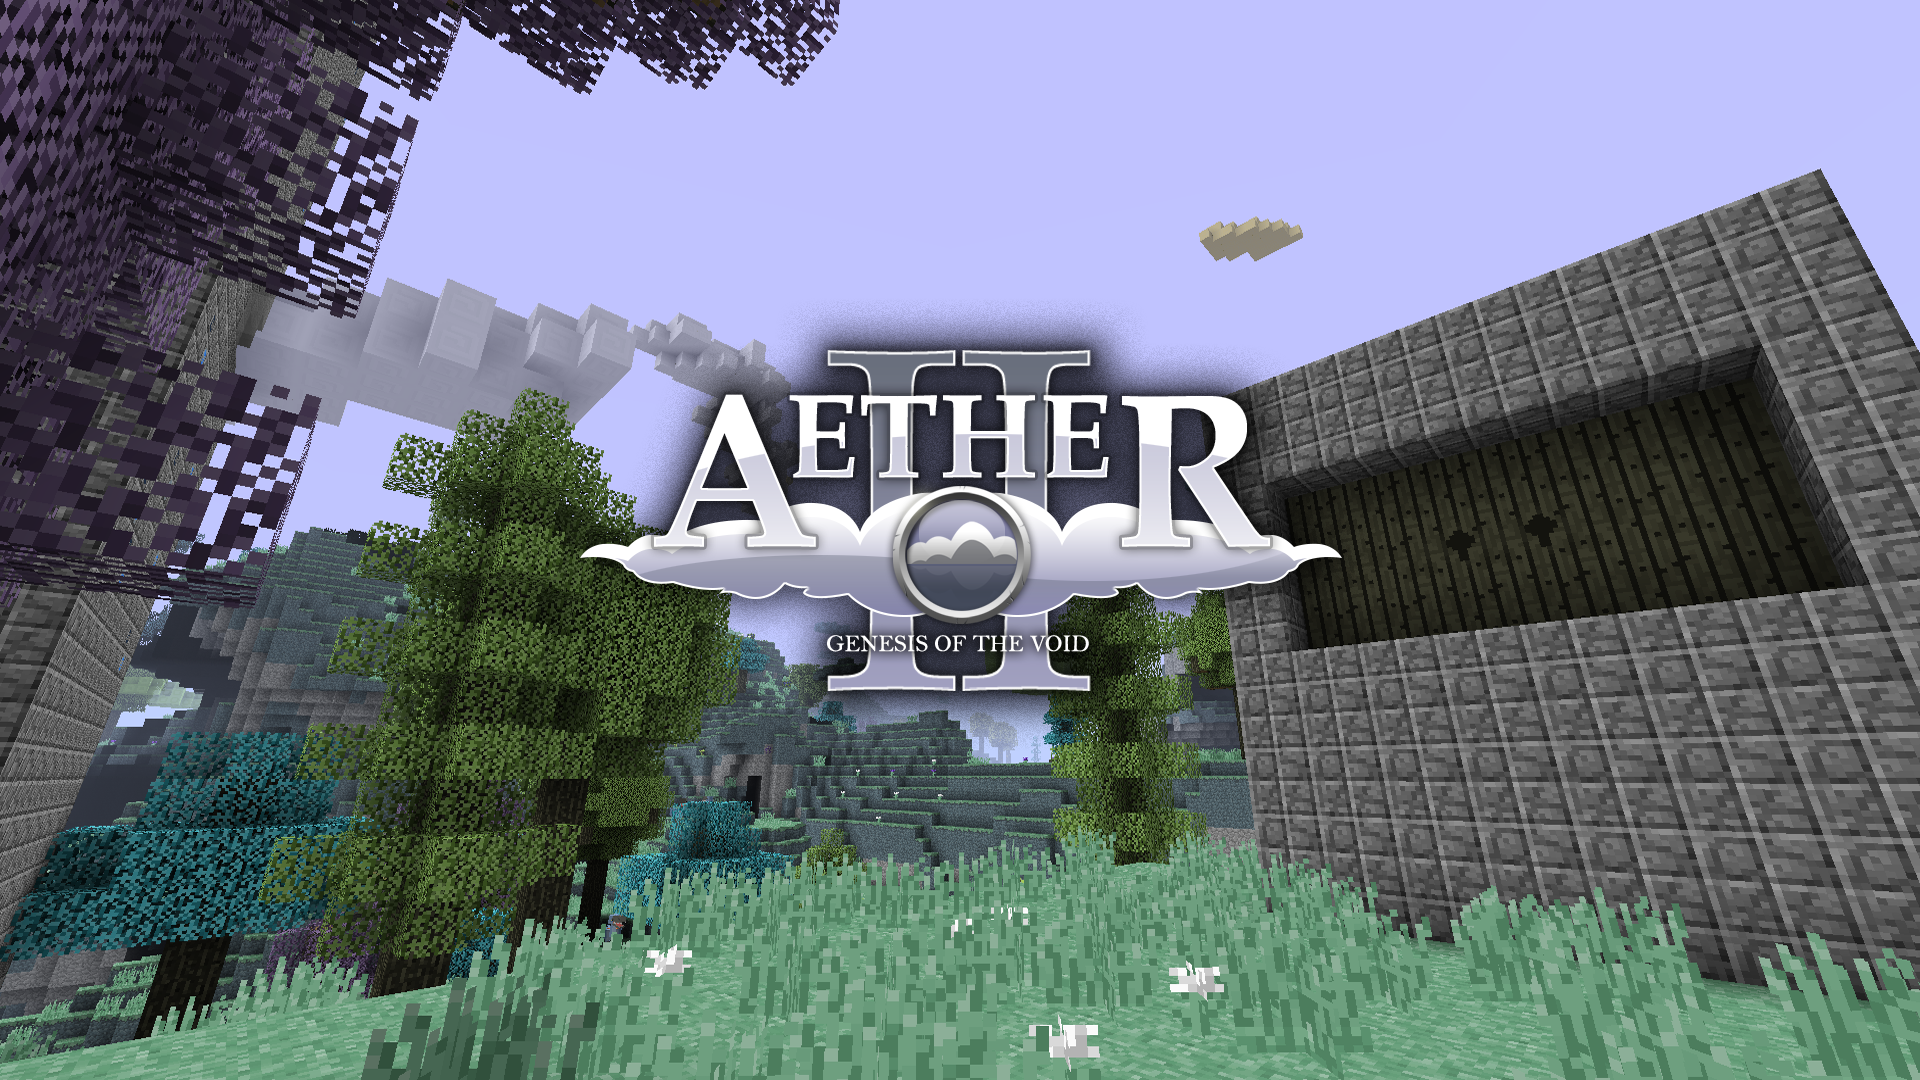 The Aether 2 Wallpaper Image